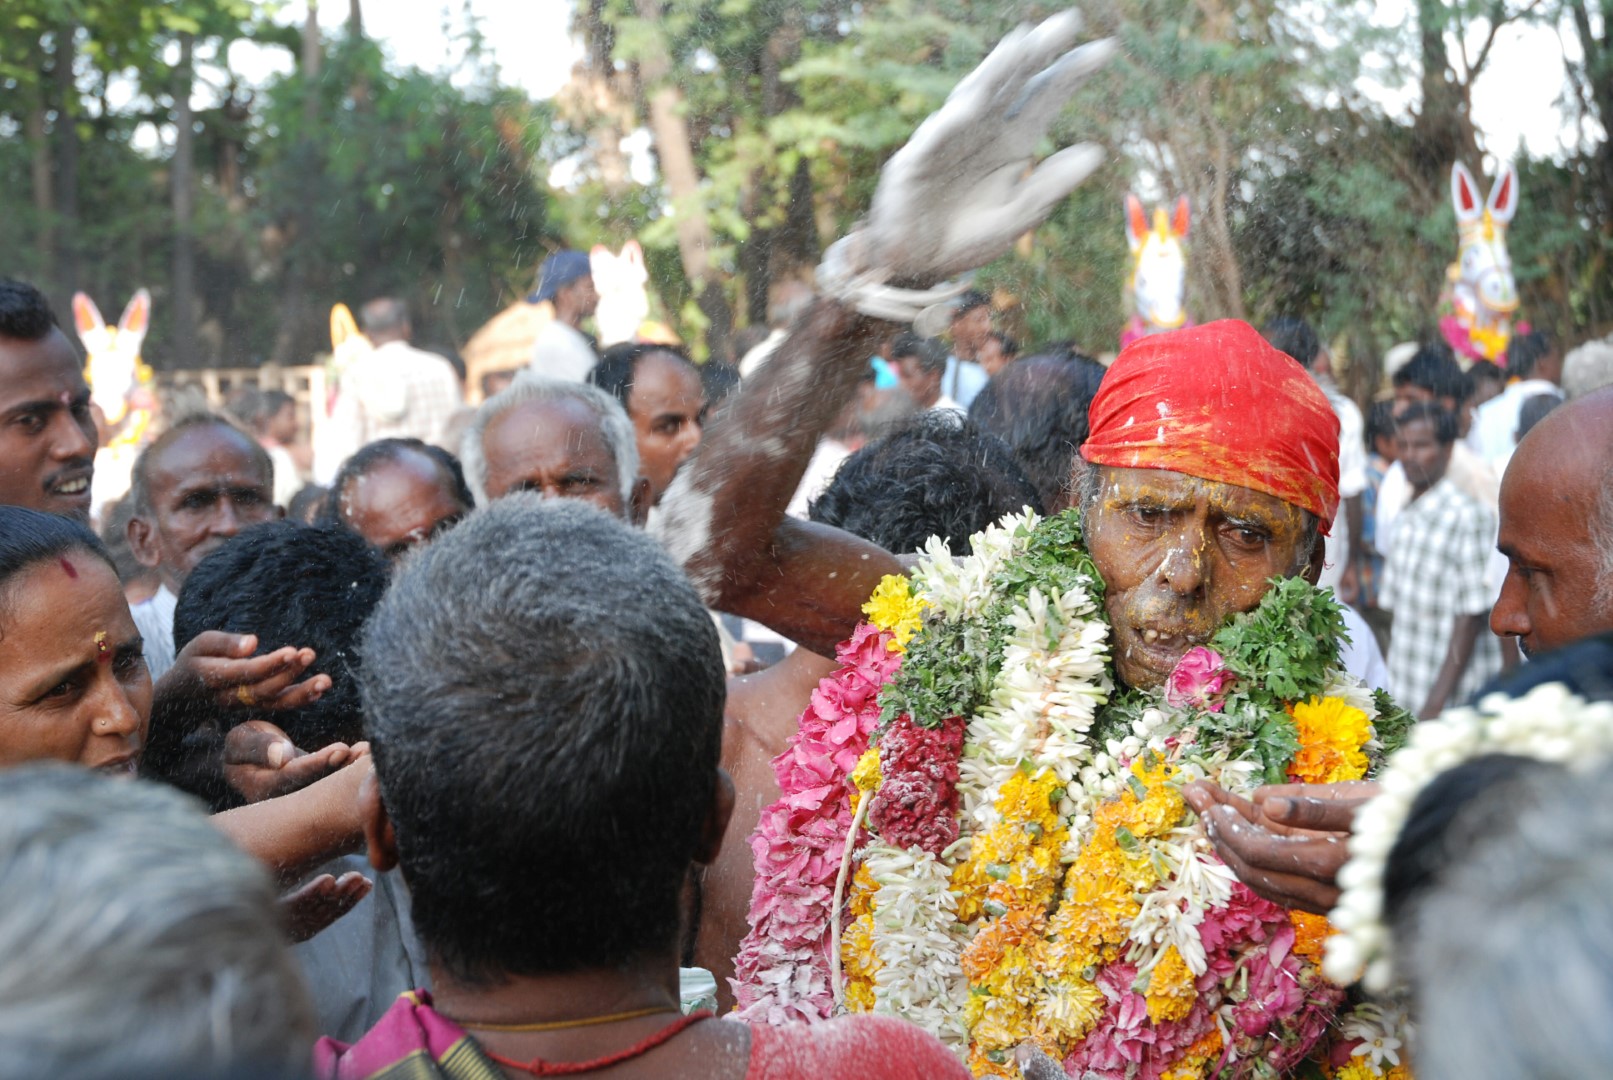 <span style="font-weight:normal;"><i>Sami</i> blesses one of his devotees by slapping her on the head with <i>vibhuti</i>, while other devotees hold out their hand to receive the sacred ashes as a benediction from god.</span>